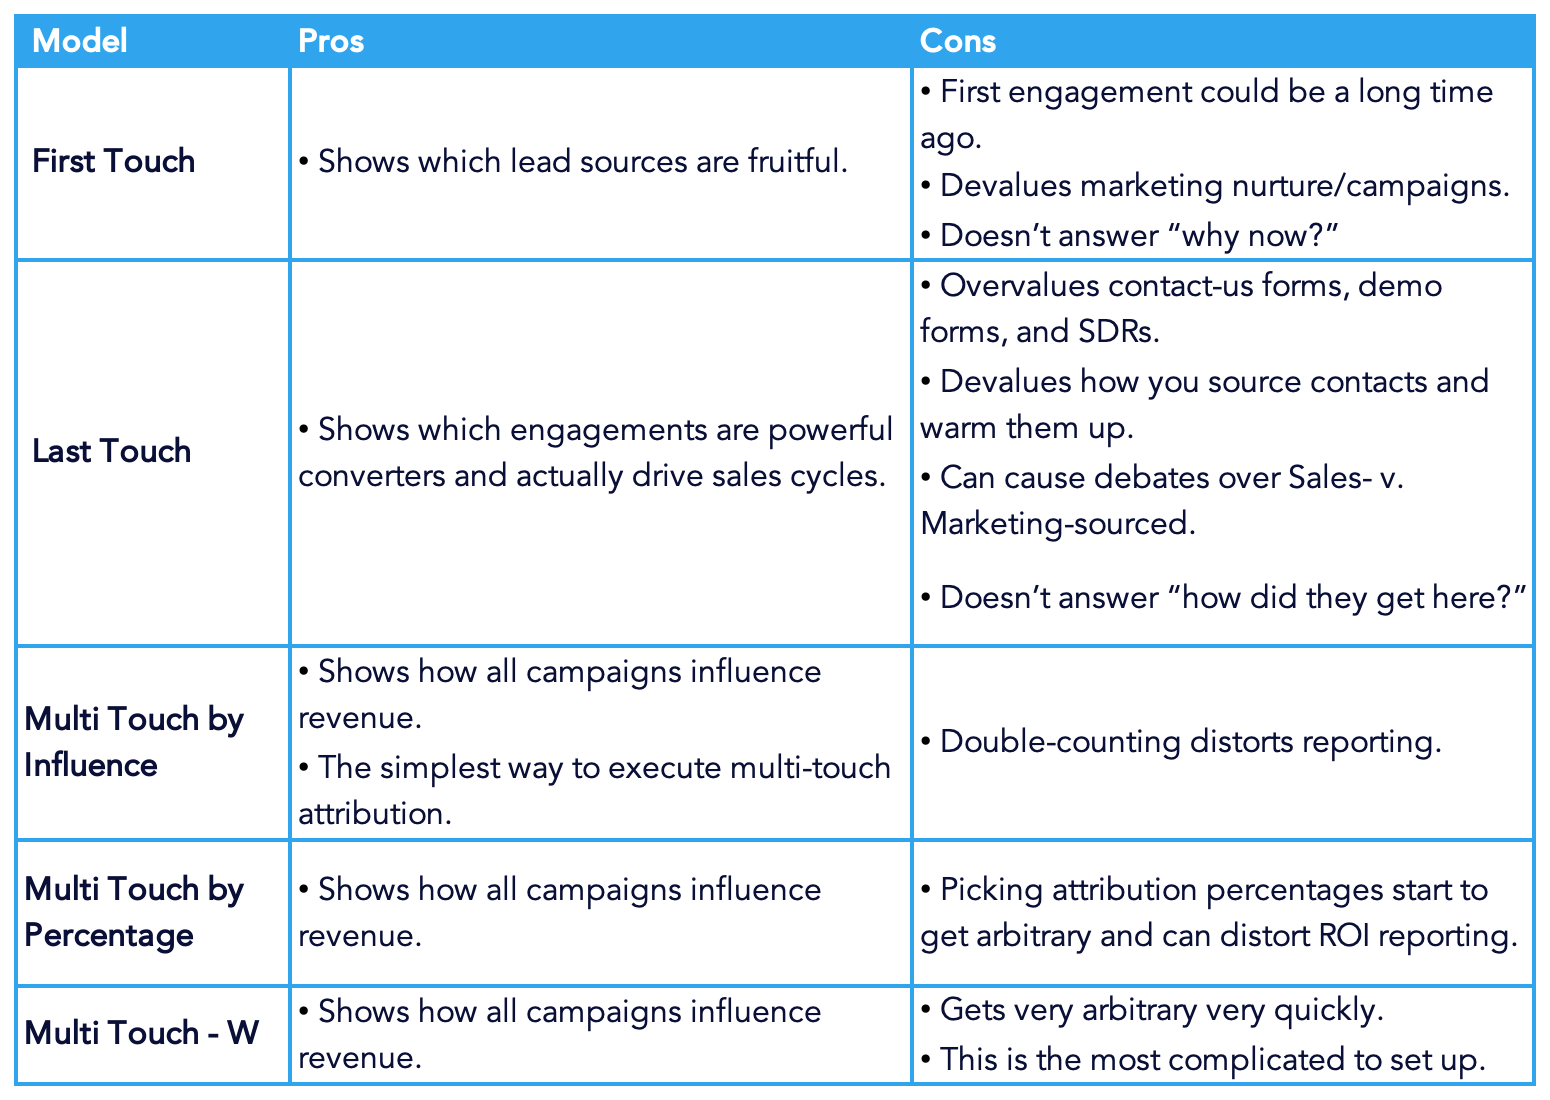 table comparing pros and cons of 5 marketing attribution models